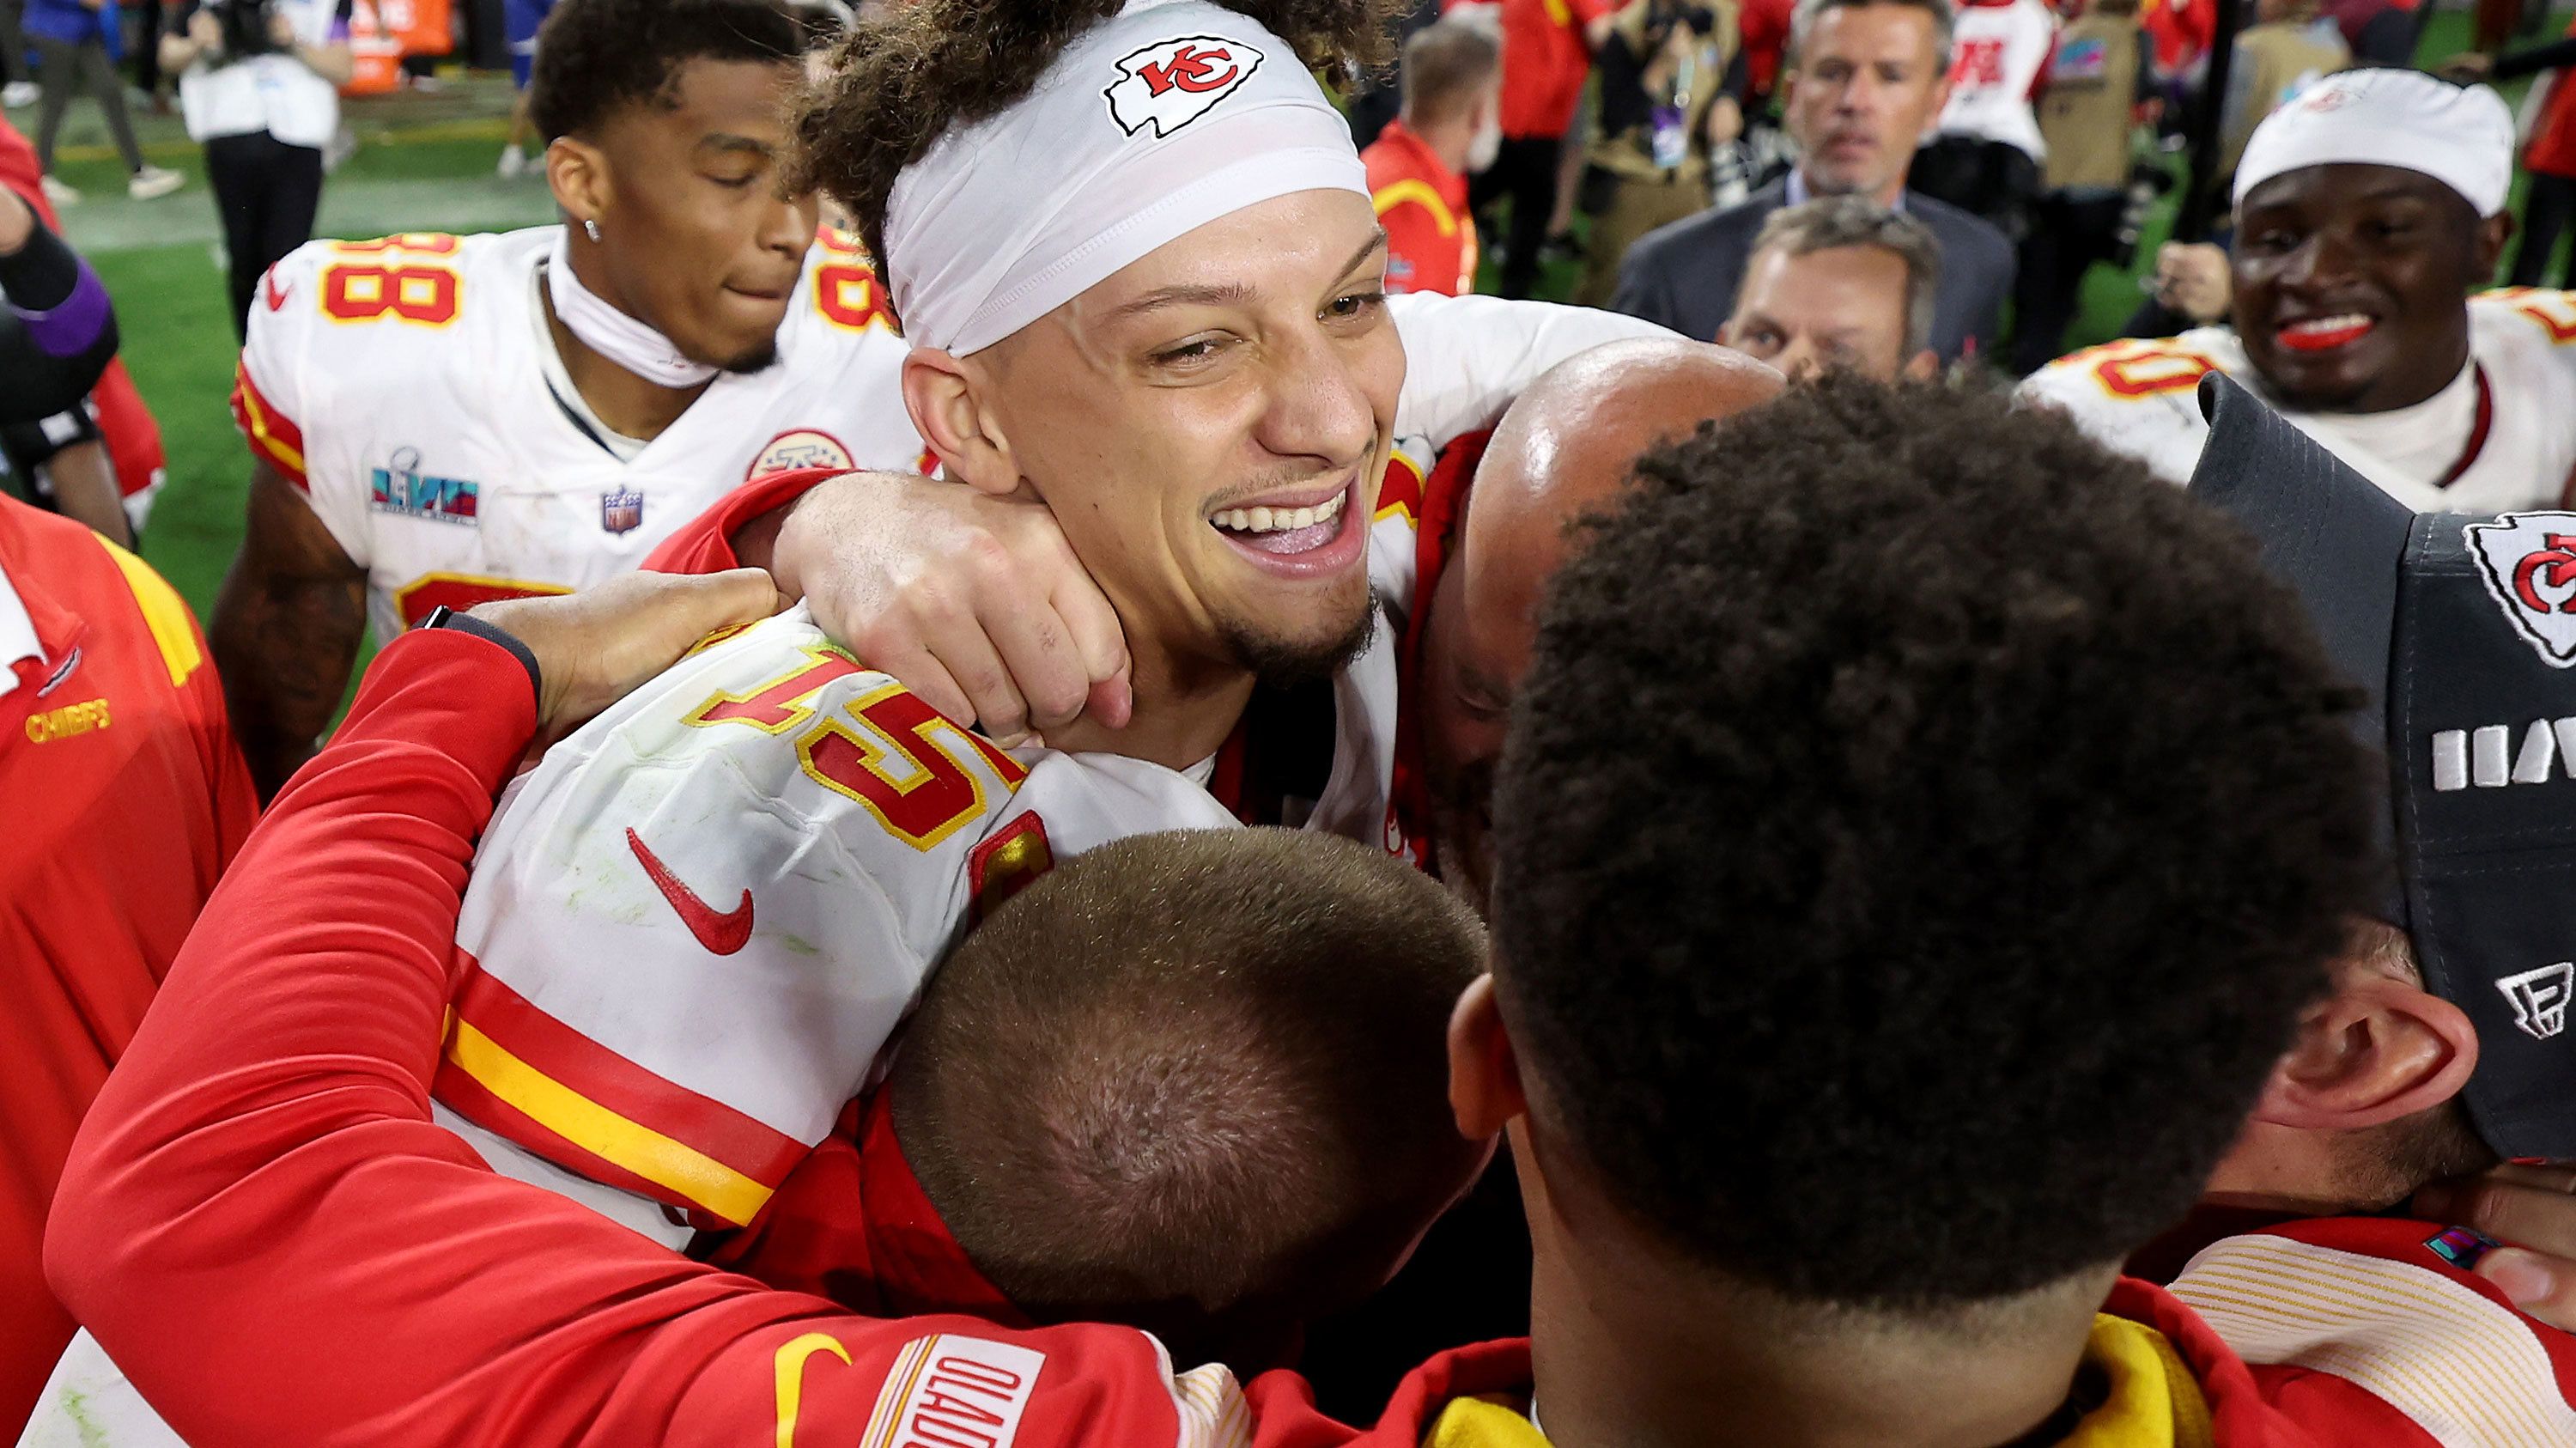 Patrick Mahomes #15 of the Kansas City Chiefs celebrates after defeating the Philadelphia Eagles 38-35 in Super Bowl LVII at State Farm Stadium on February 12, 2023 in Glendale, Arizona. (Photo by Gregory Shamus/Getty Images)